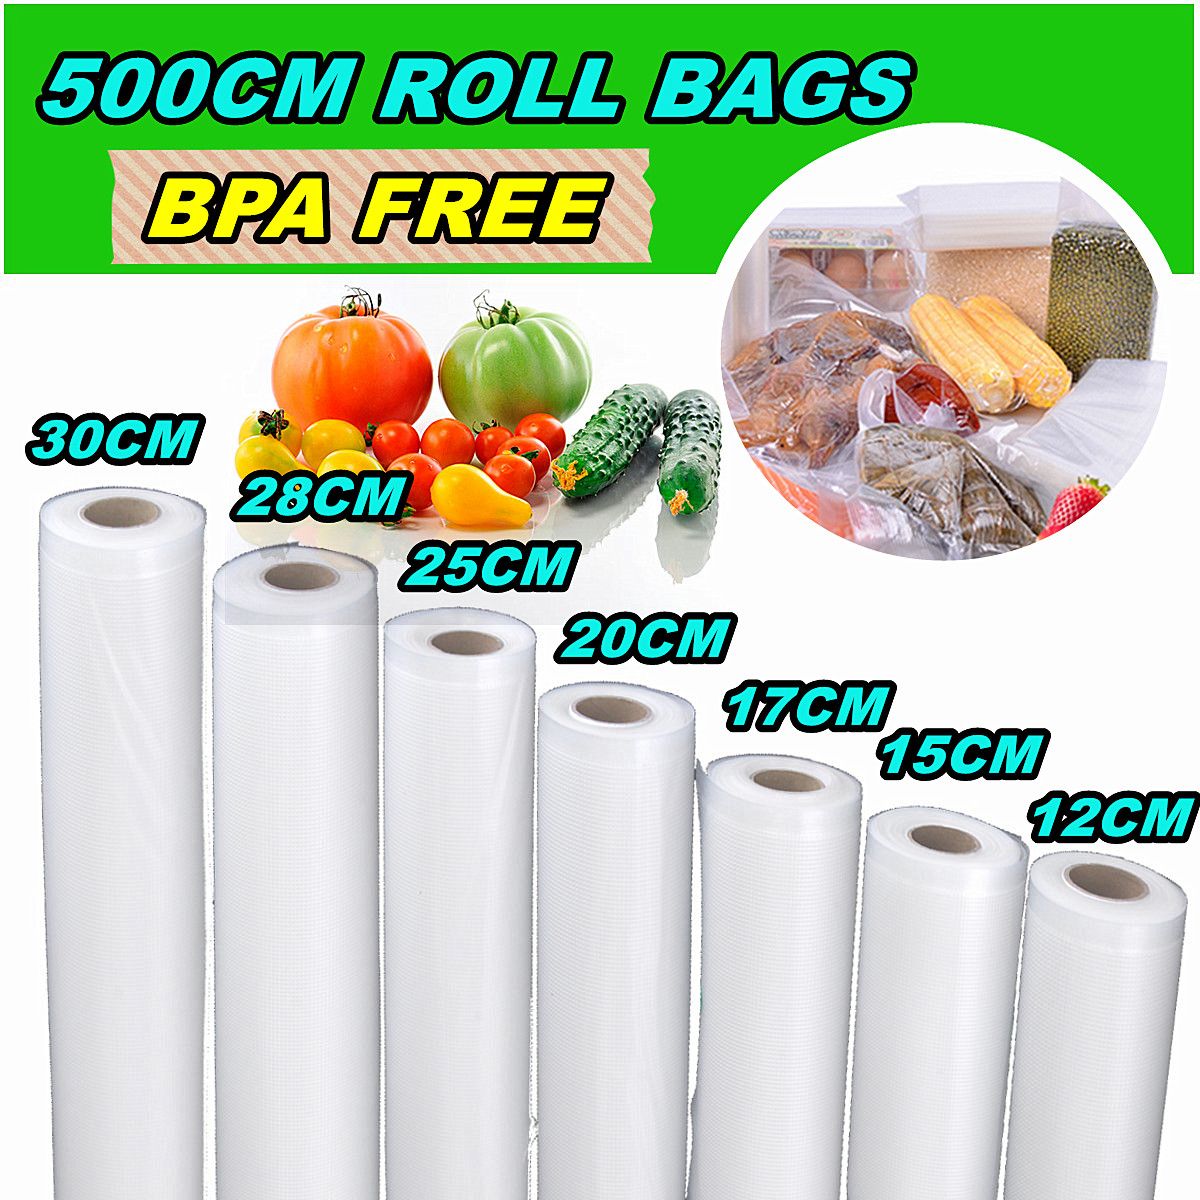 7-Different-Size-Transparent-Vacuum-Sealer-Bags-Rolls-Food-Saver-Seal-Storage-Package-Bags-1157190